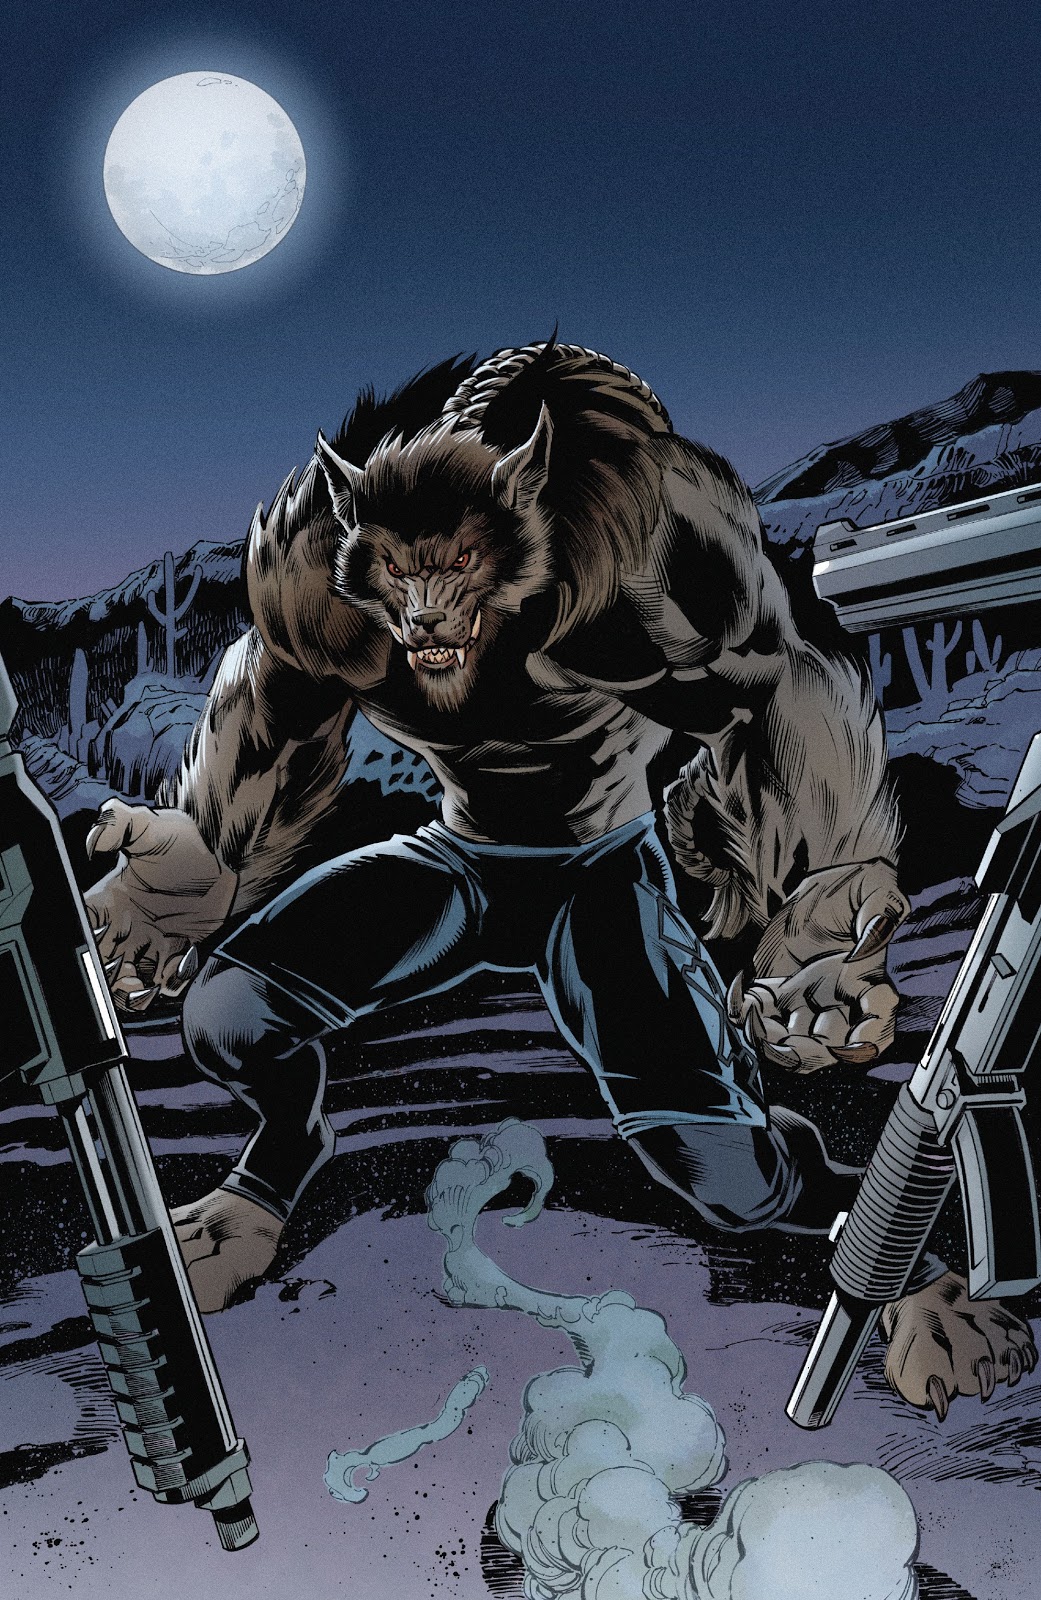 Marvel's 'Werewolf by Night': Not for young and squeamish